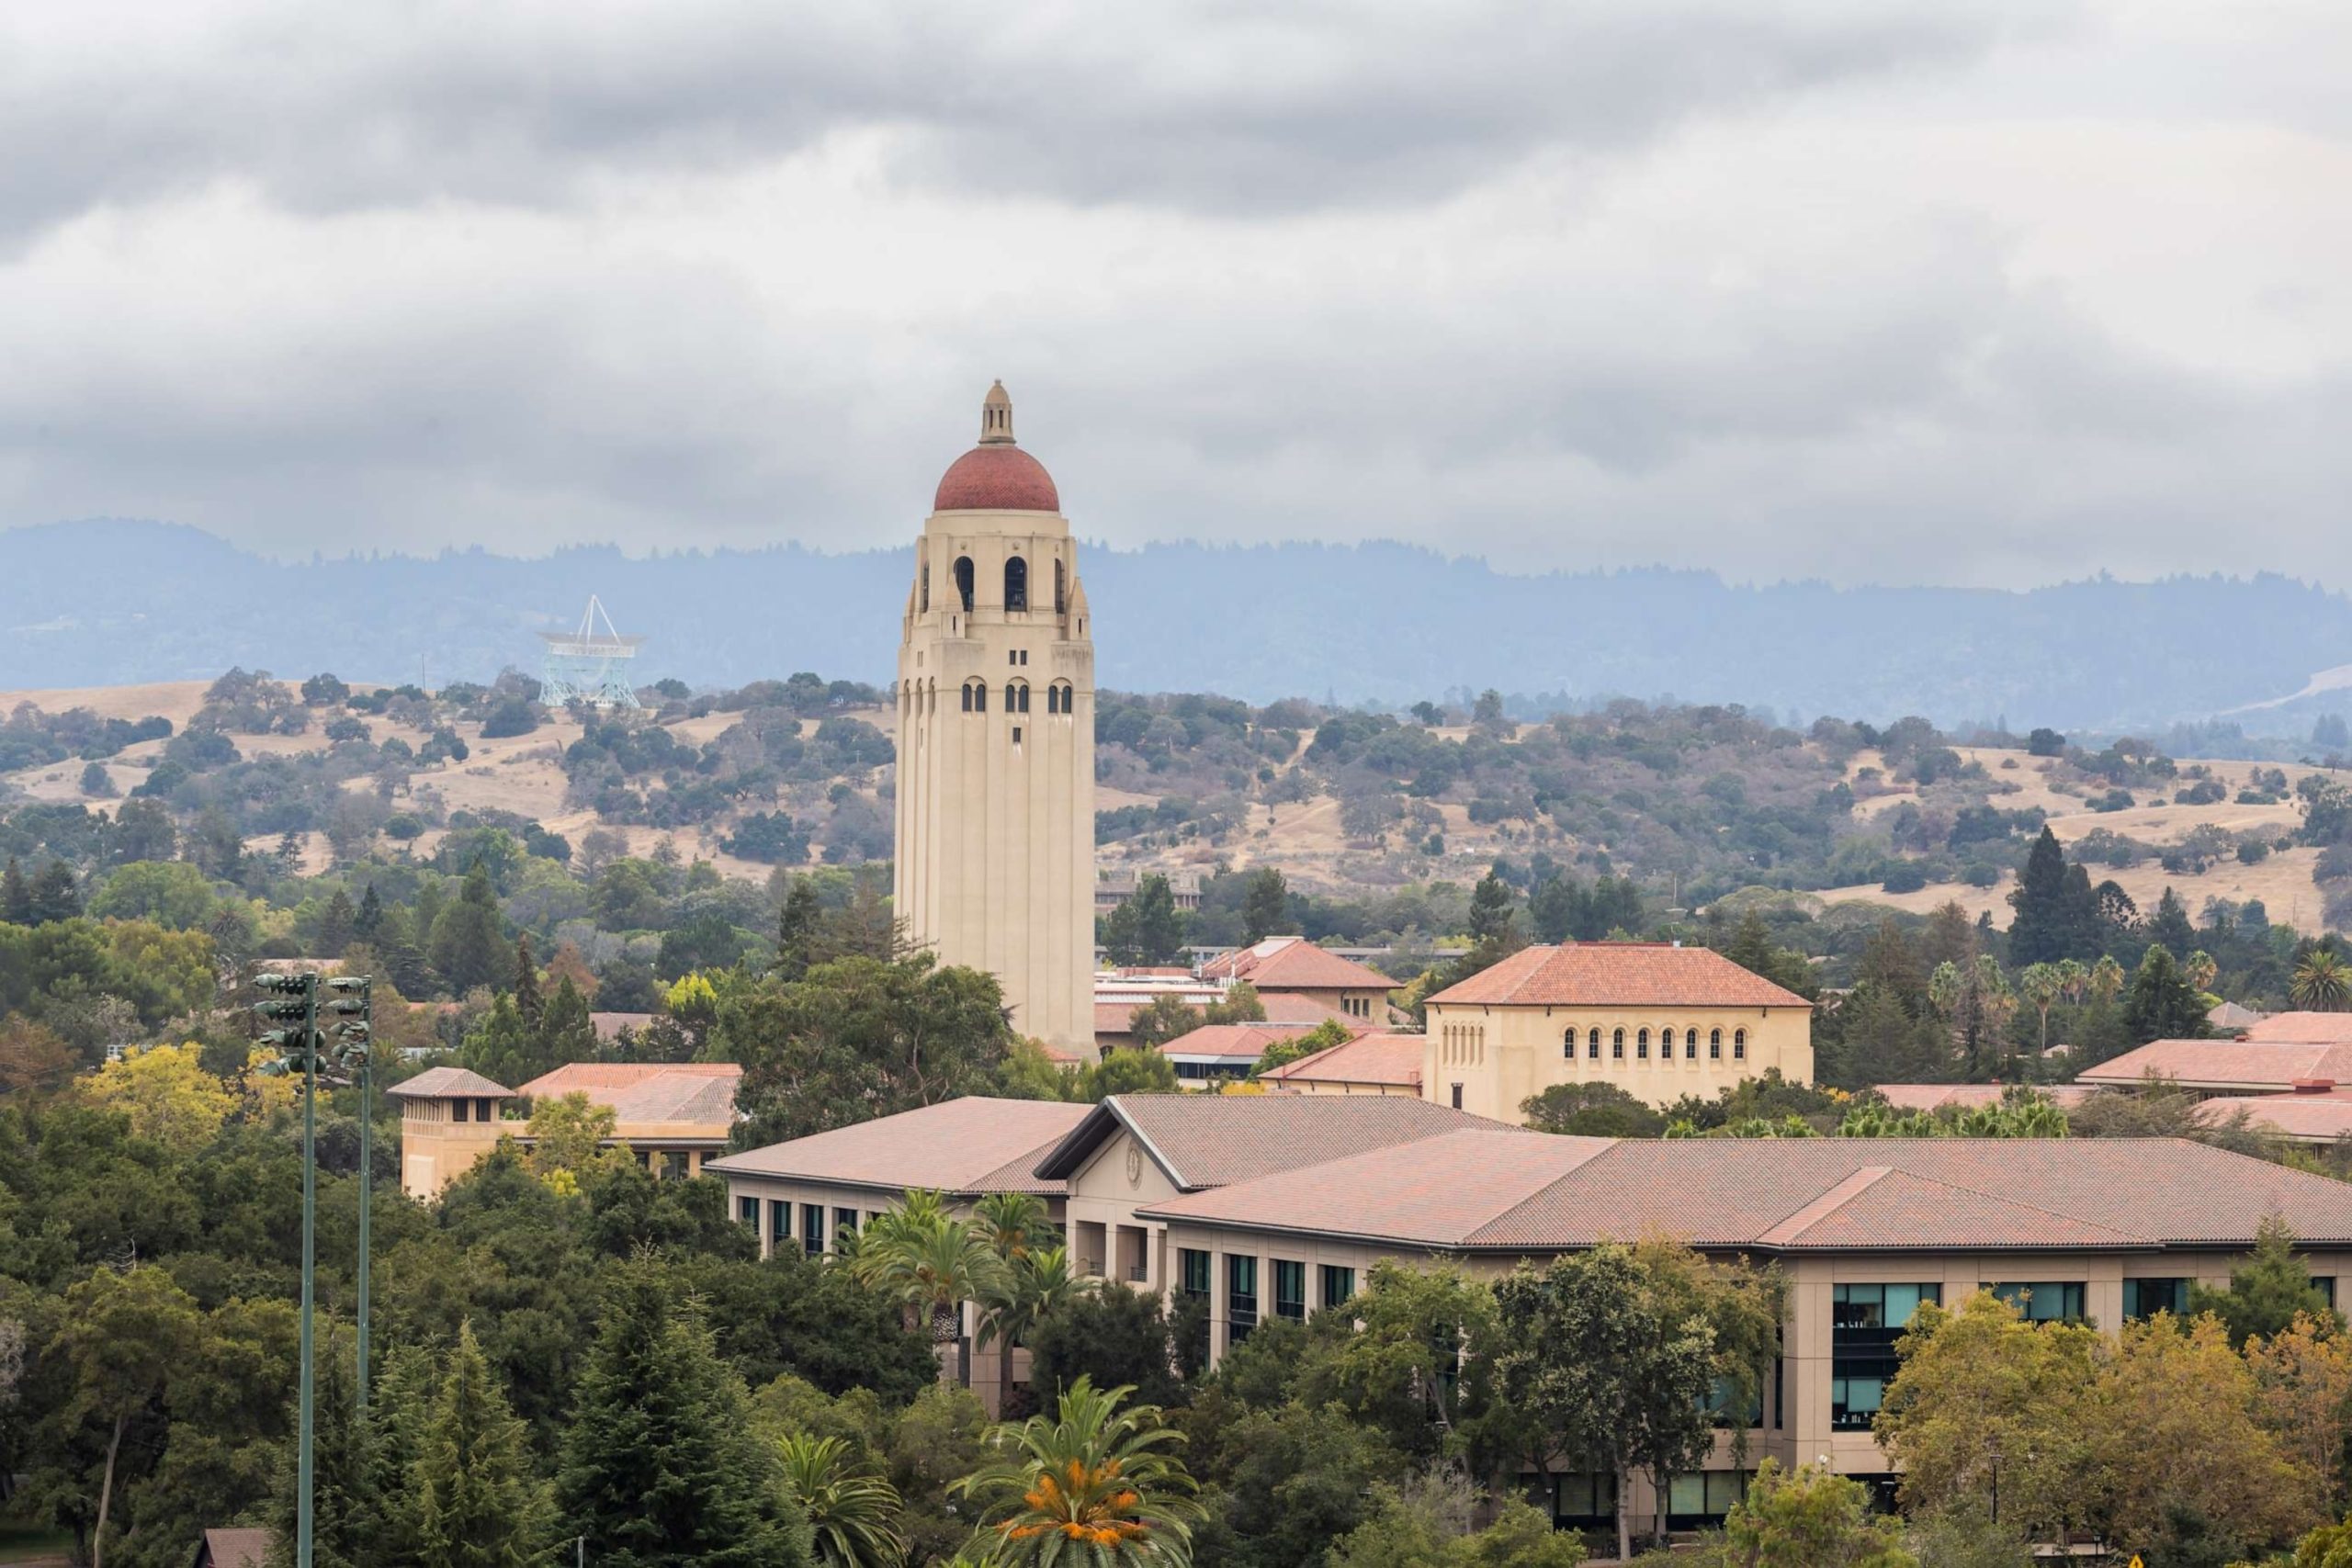 University police report hit-and-run incident involving Arab Muslim student at Stanford campus